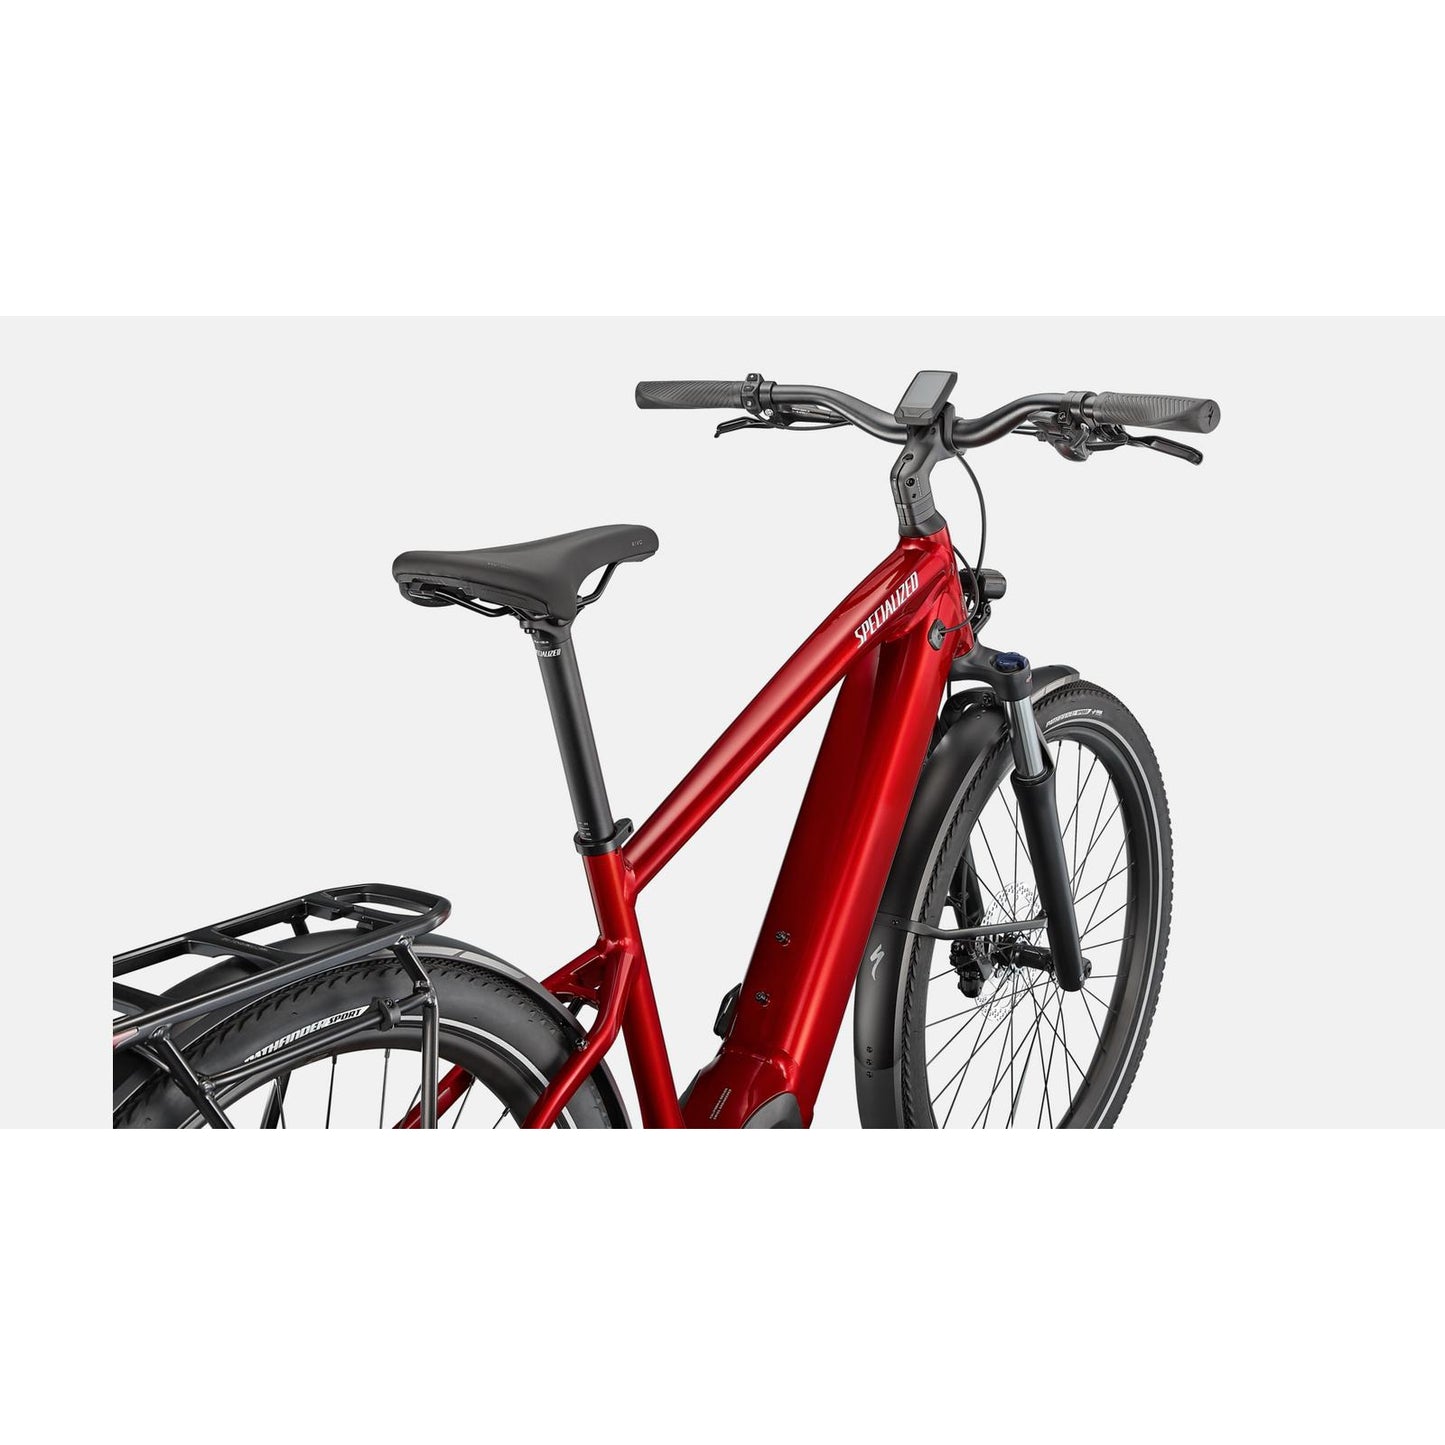 Specialized Turbo Vado 3.0 Active Electric Bike - Bikes - Bicycle Warehouse